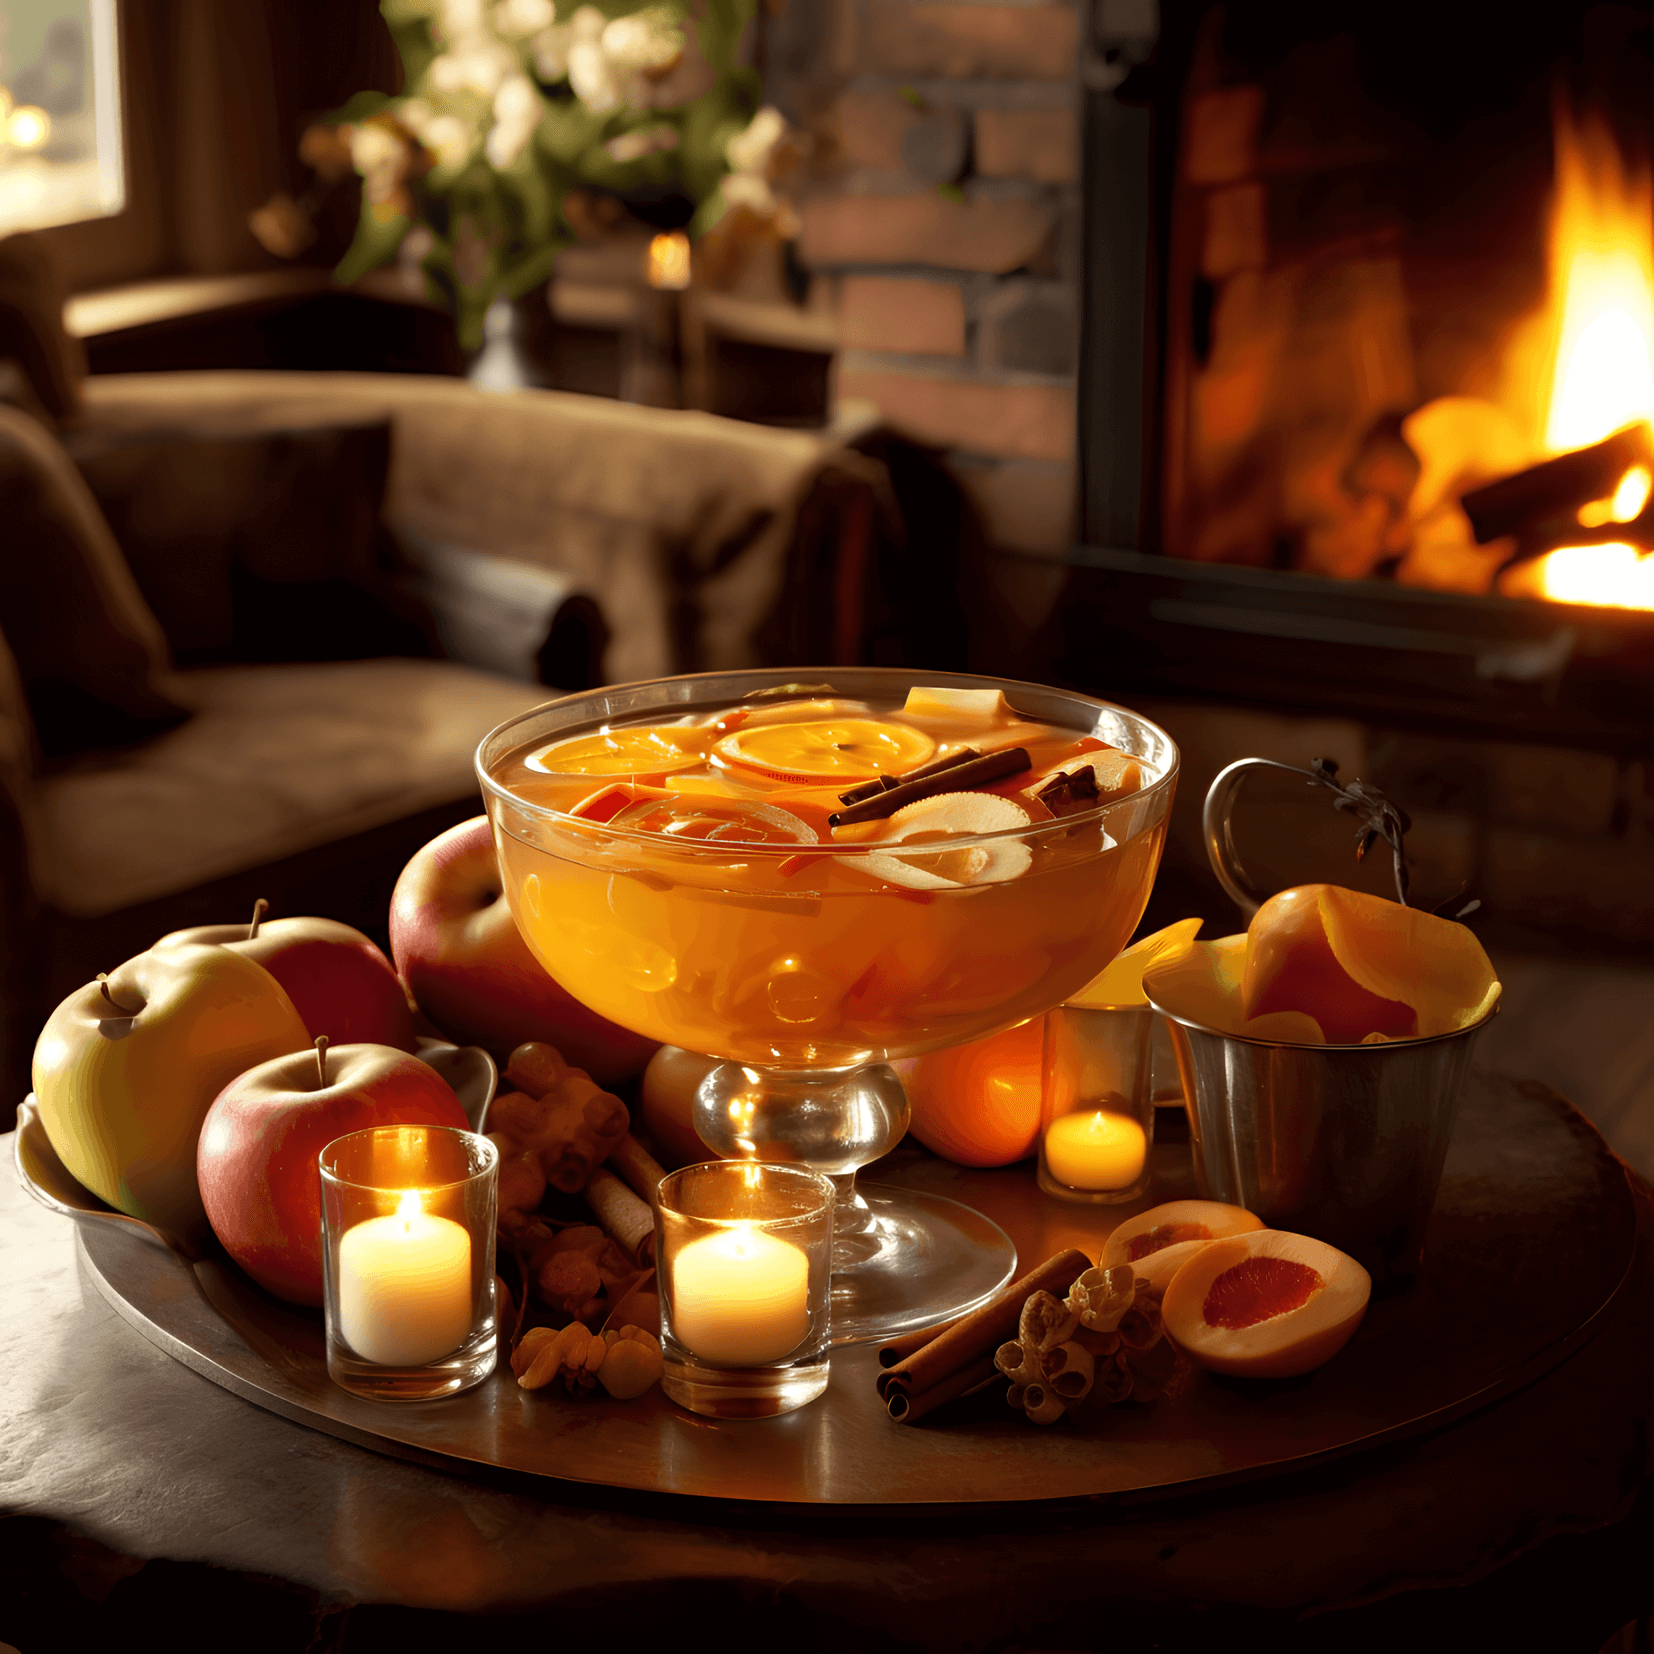 Cider Punch Cocktail Recipe - Cider Punch is a delightful combination of sweet, tangy, and spicy flavors. The apple cider provides a natural sweetness, while the lemon juice adds a refreshing tartness. The cinnamon and other spices bring warmth and complexity to the drink, making it perfect for sipping on a chilly evening.